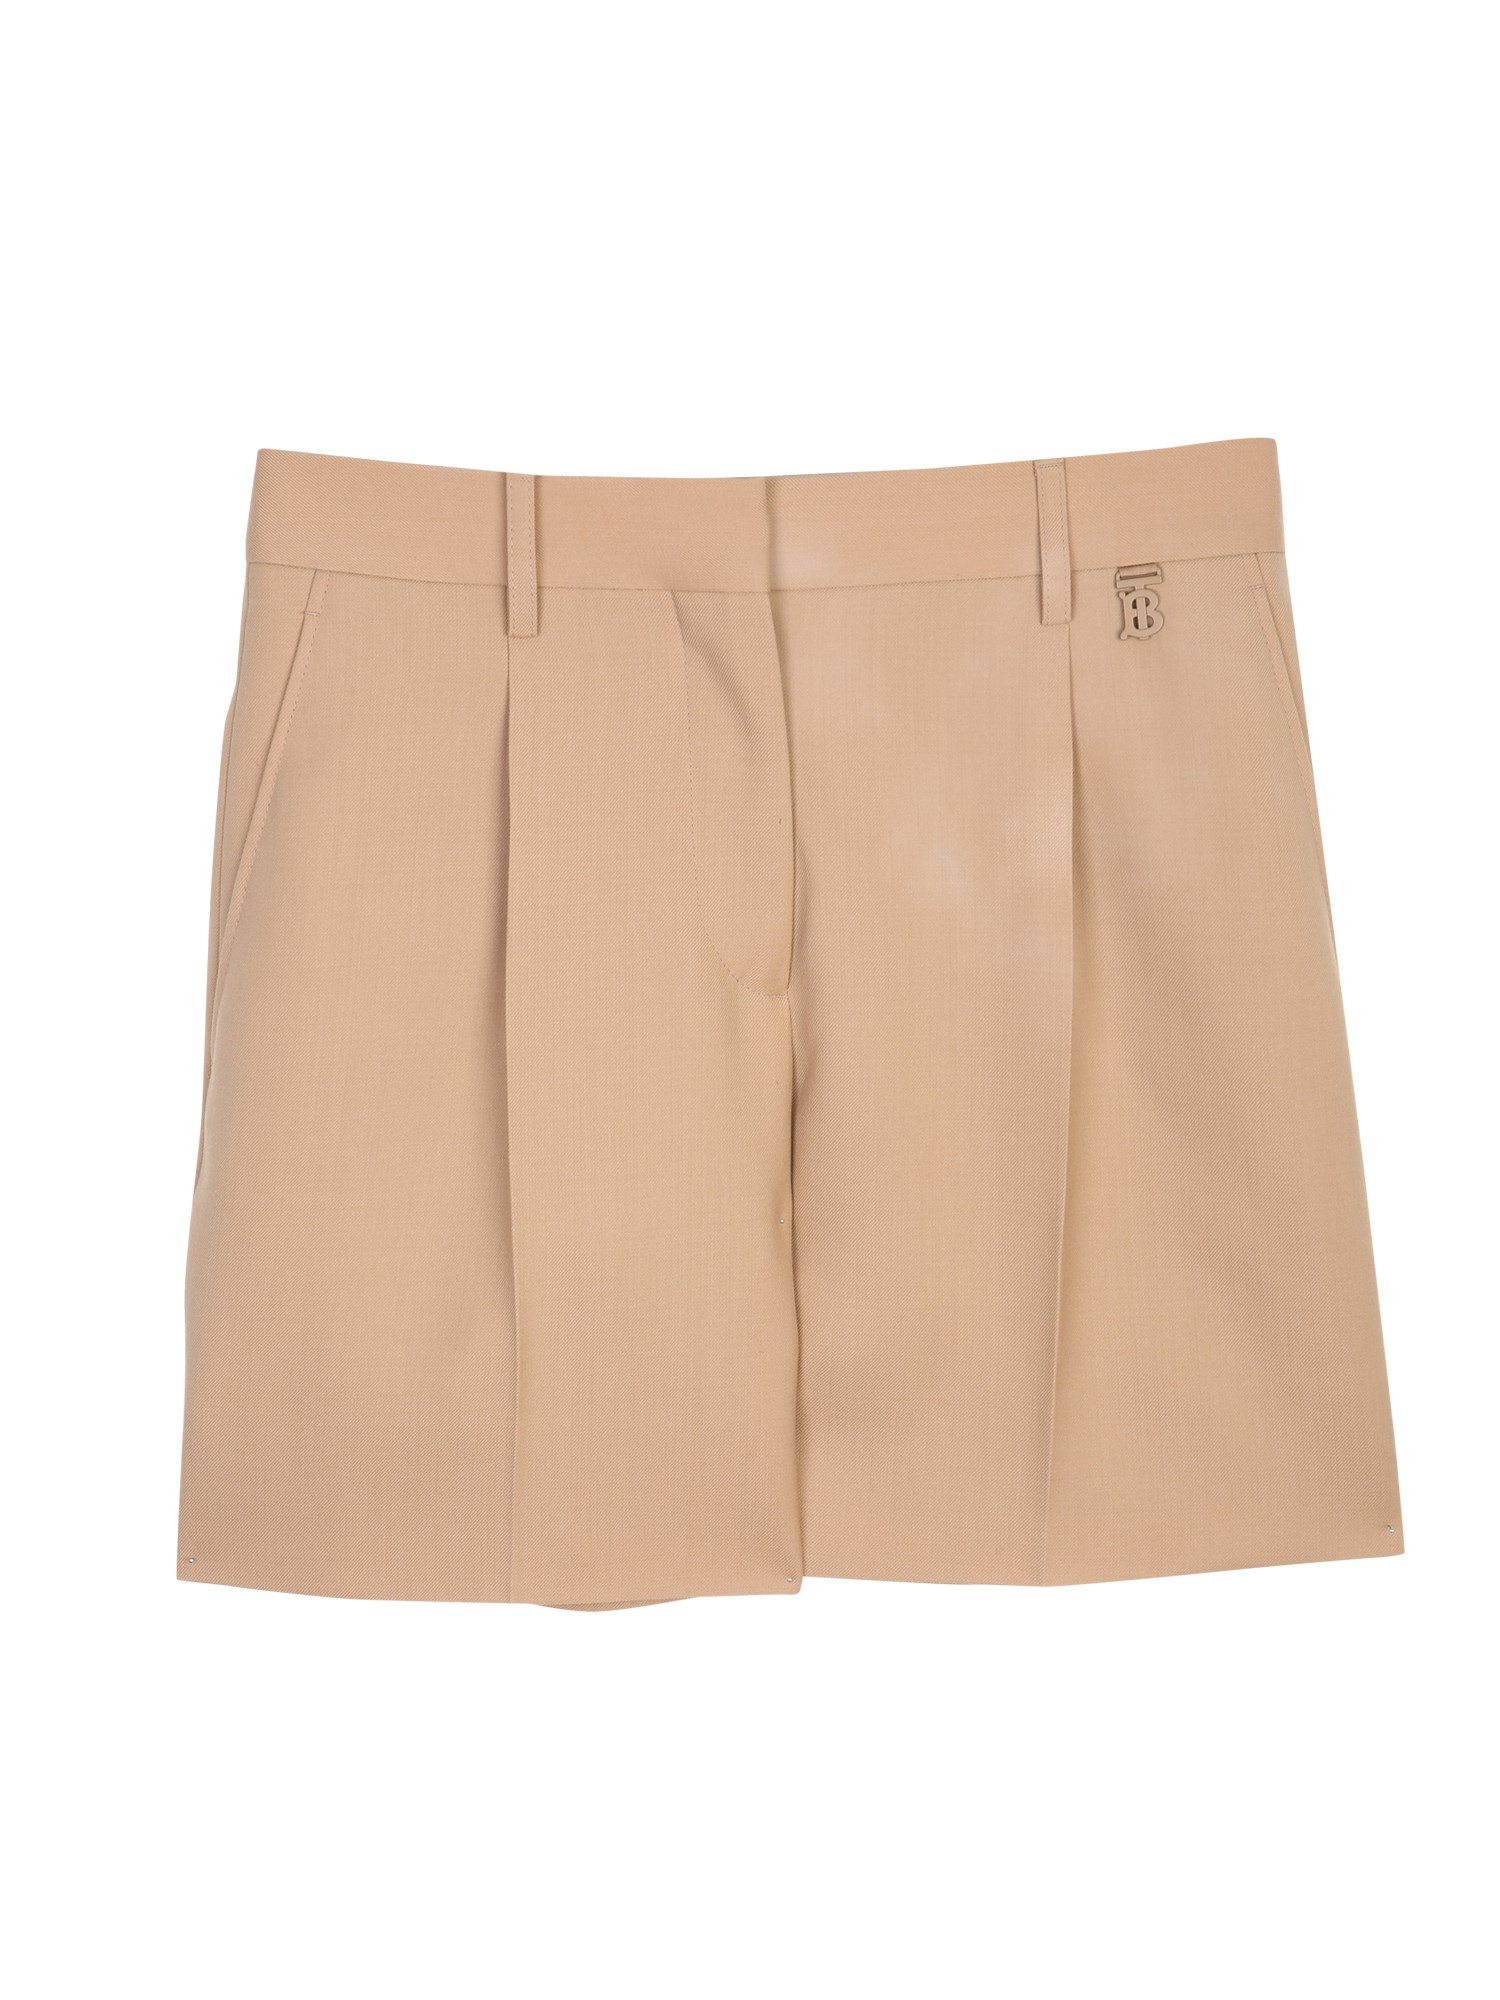 burberry shorts with pleats